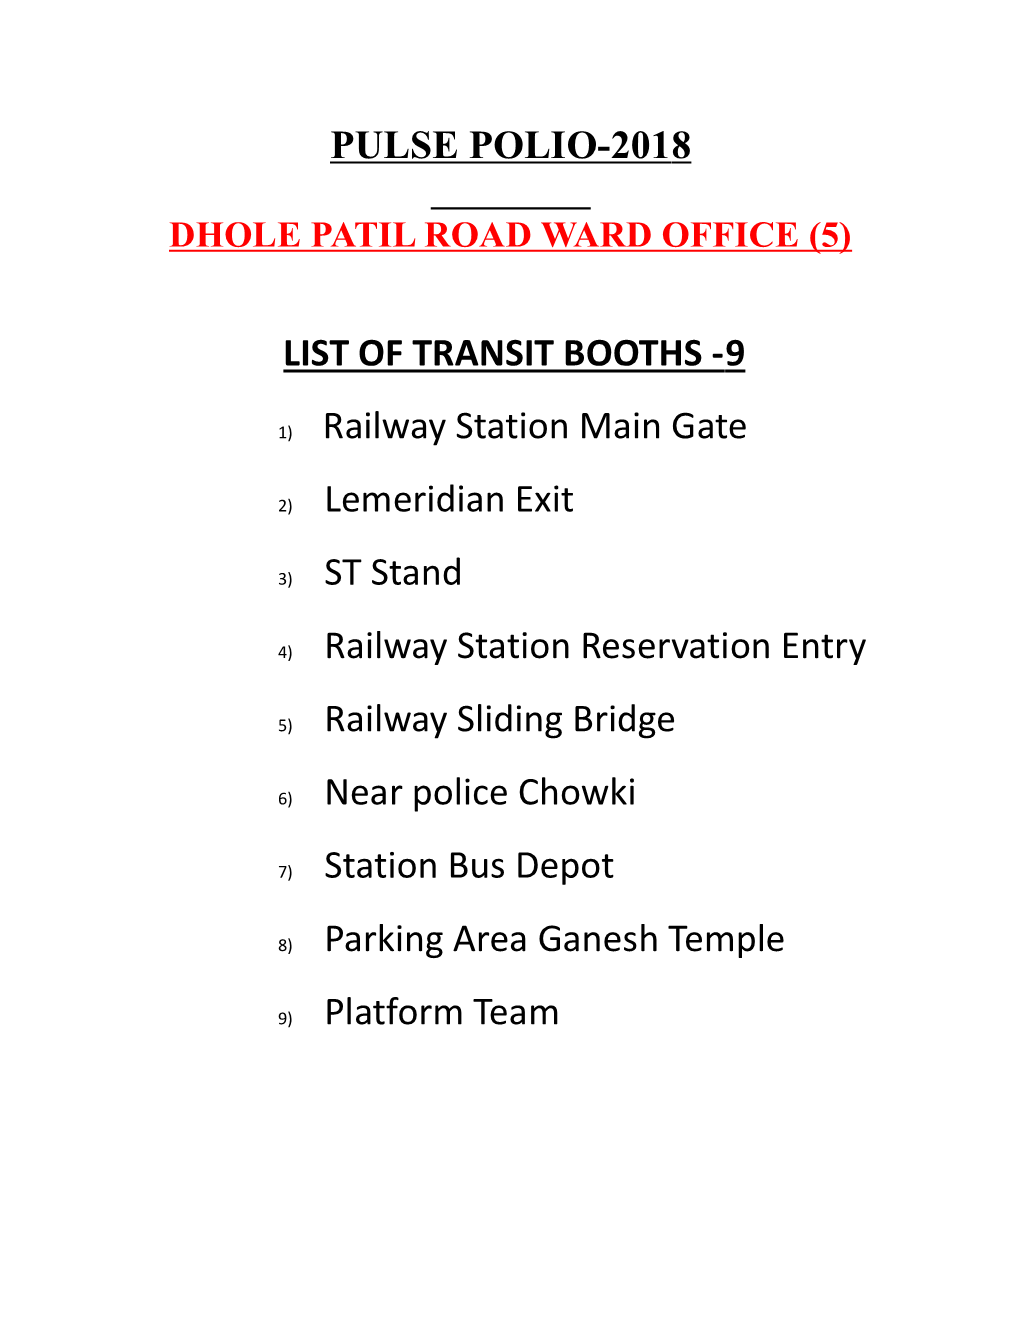 List of Transit Booths - 9